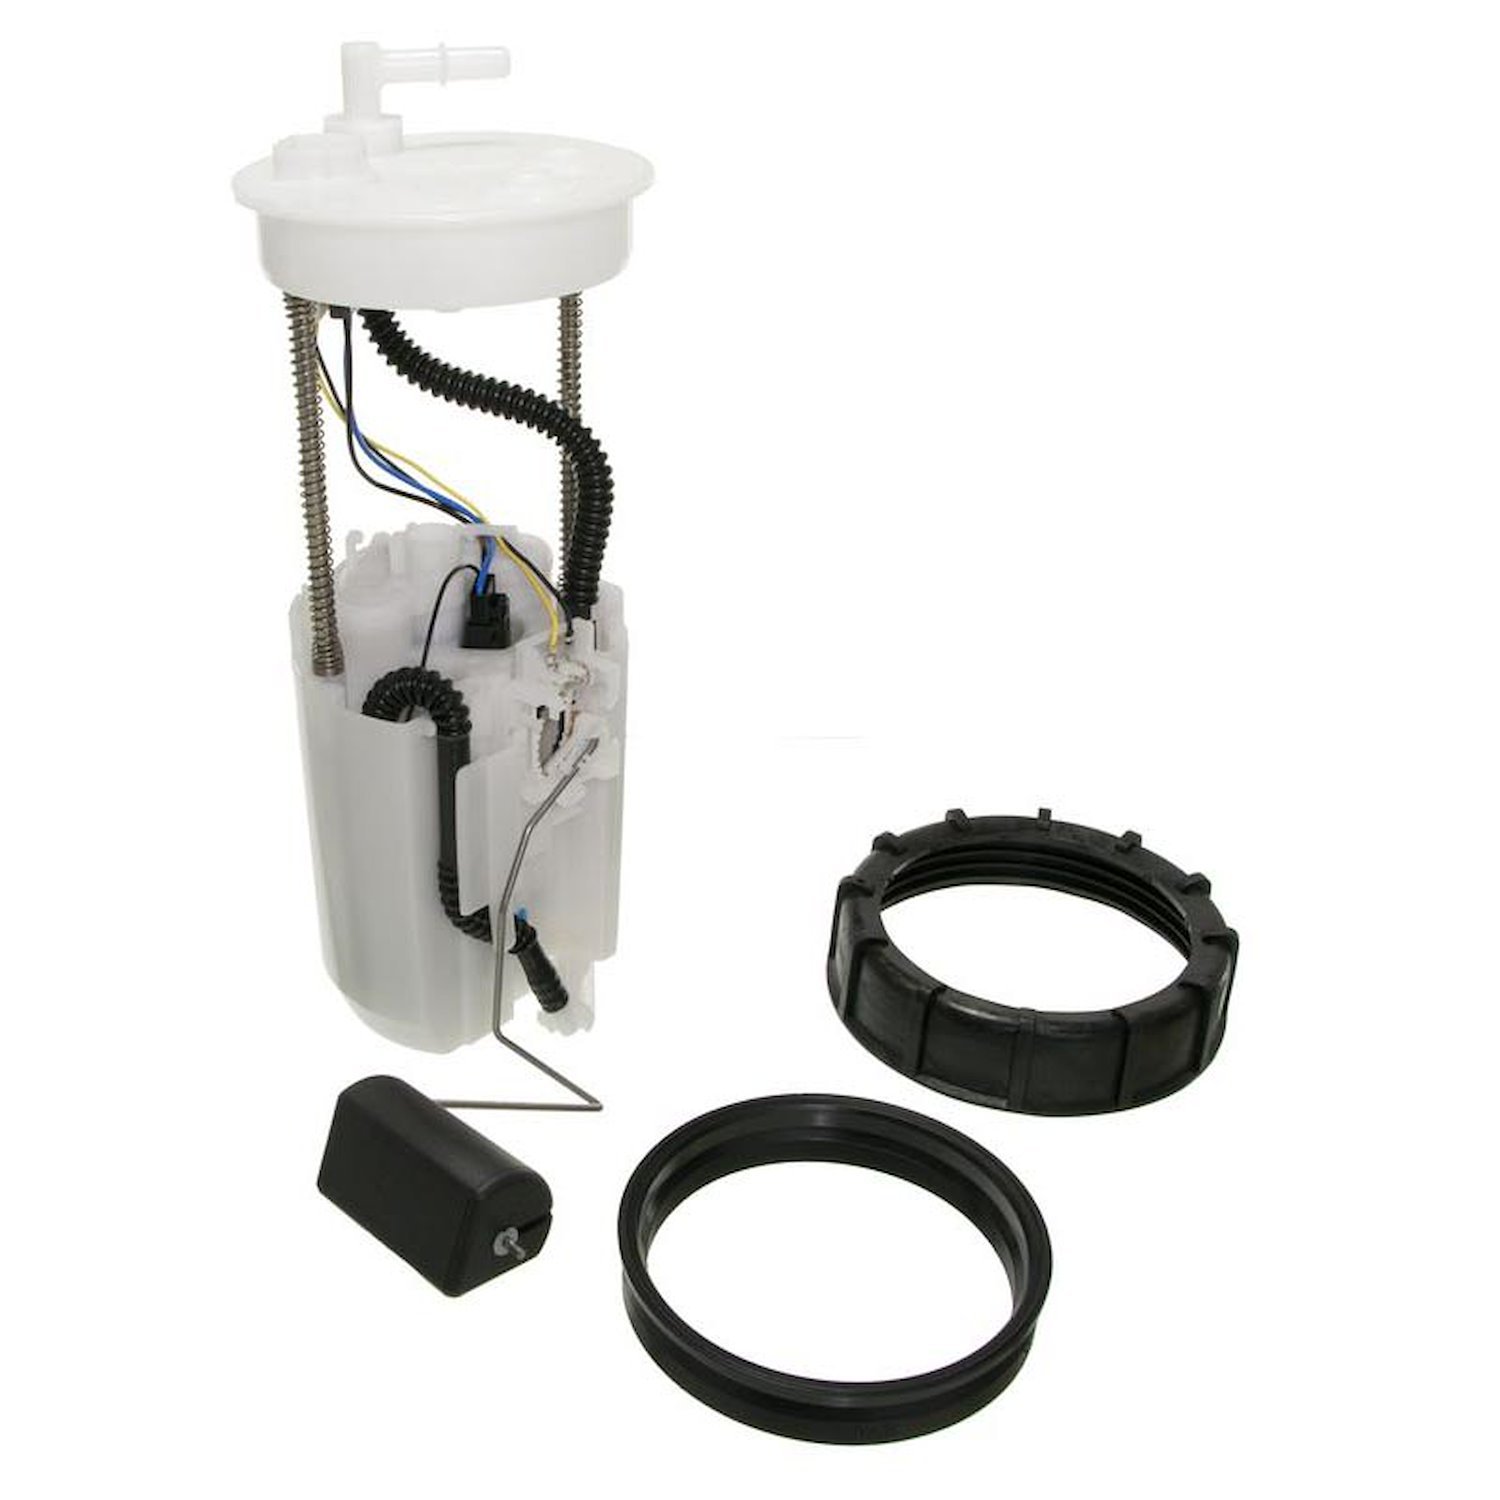 OE Replacement Fuel Pump Module Assembly for 2005-2006 Honda CR-V